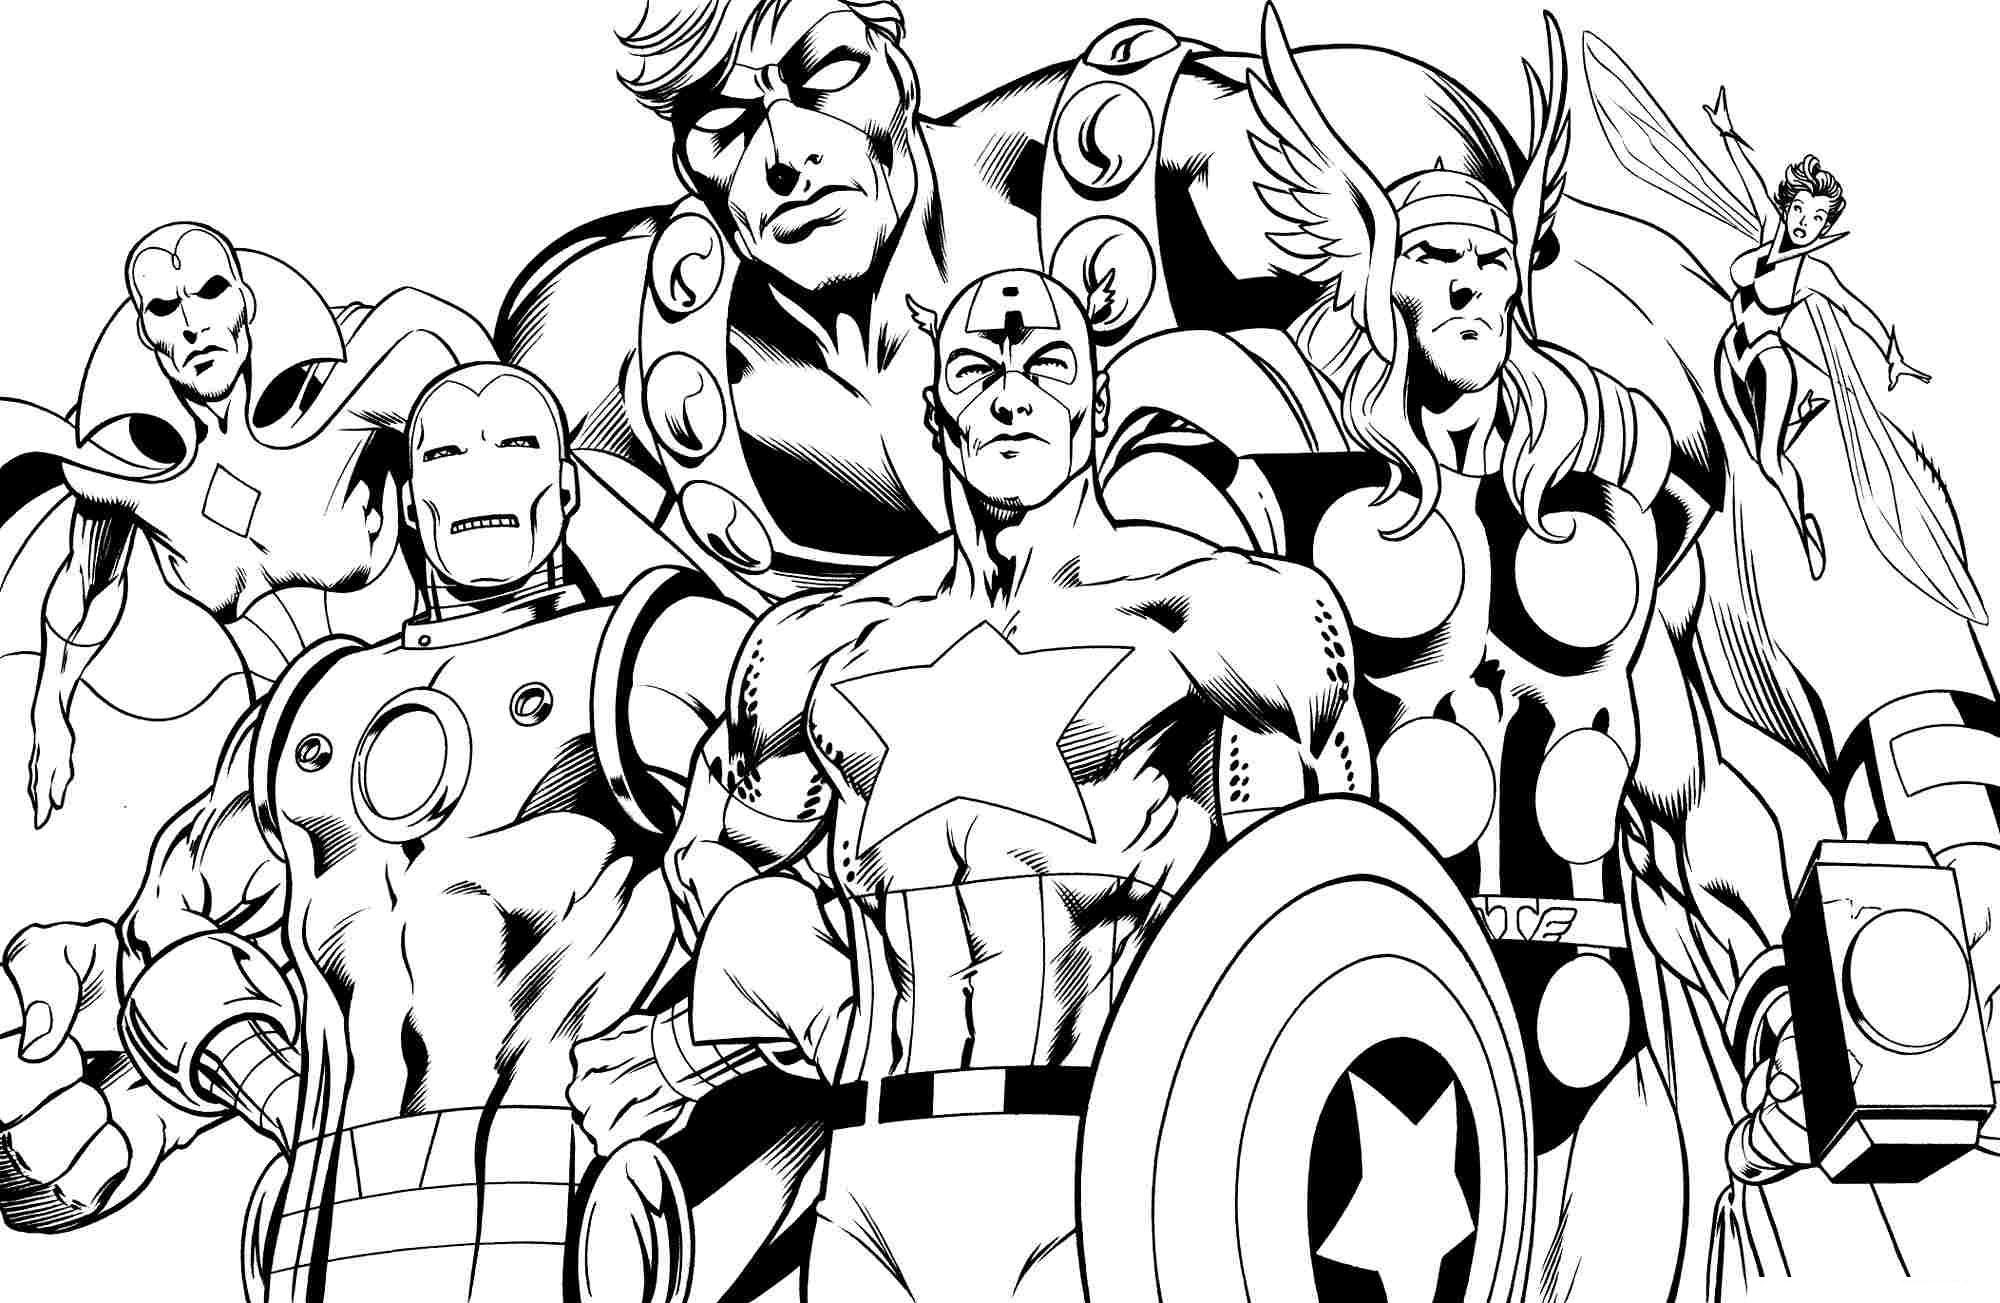 Avengers Coloring Pages   Best Coloring Pages For Kids